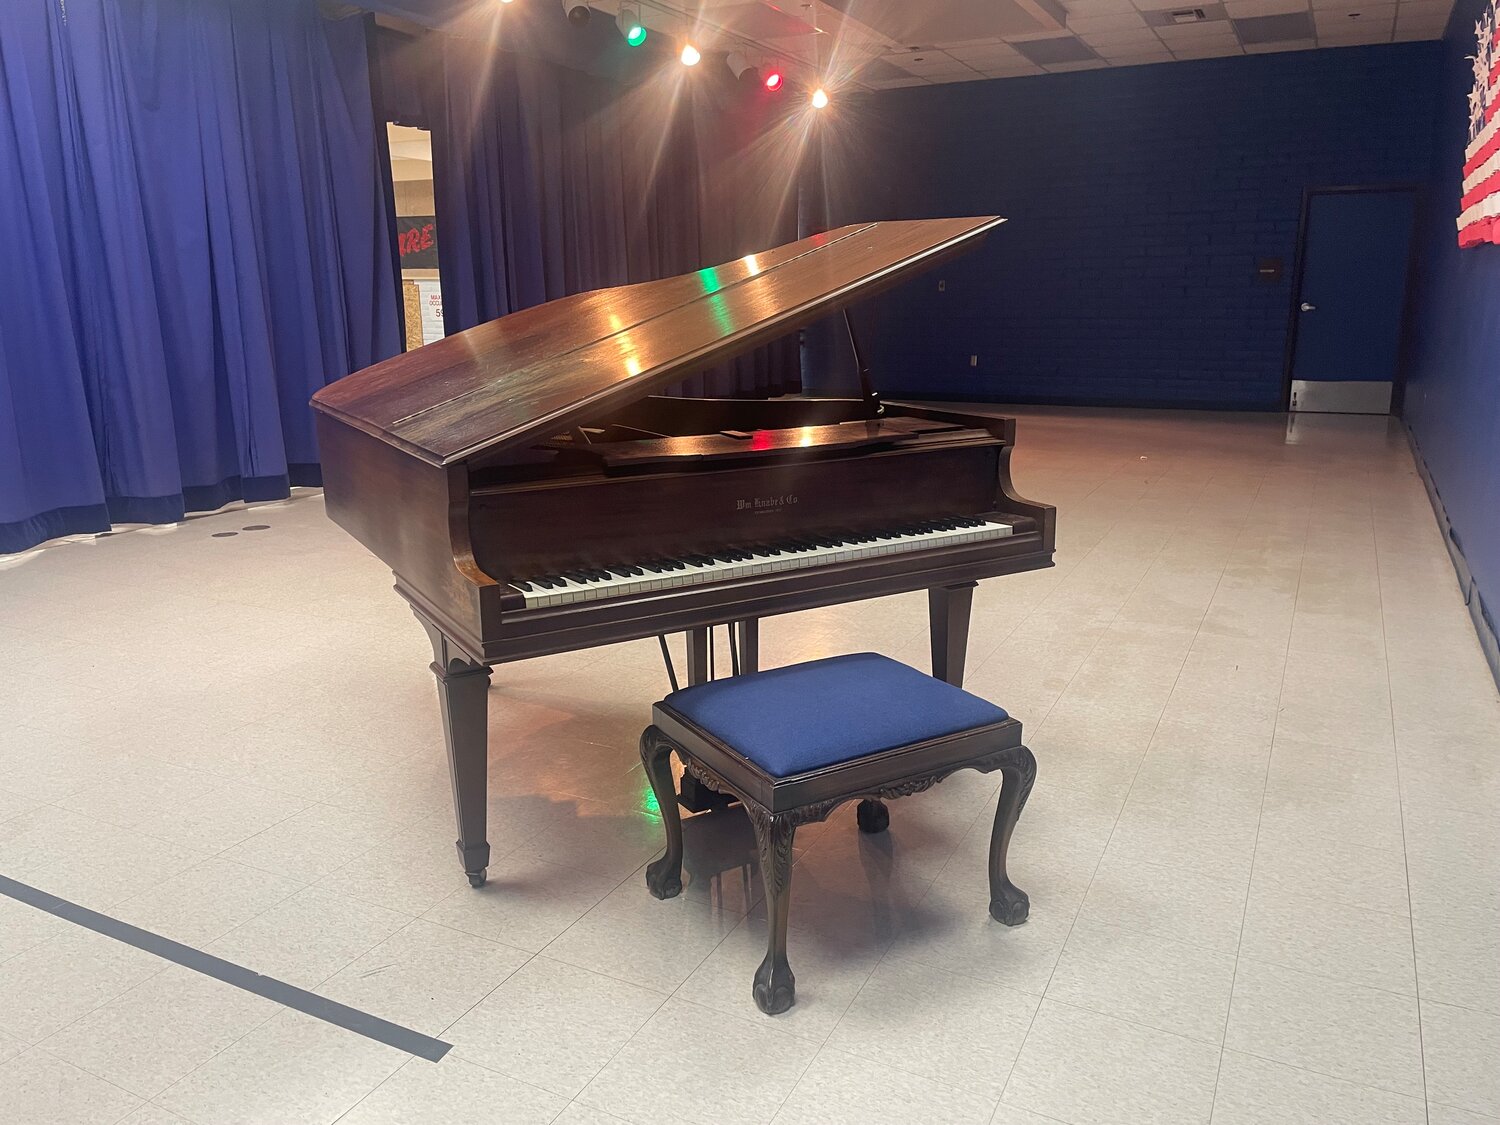 The grand piano donated to Desert Vista Elementary School, 3701 E. Broadway Ave. in Apache Junction.